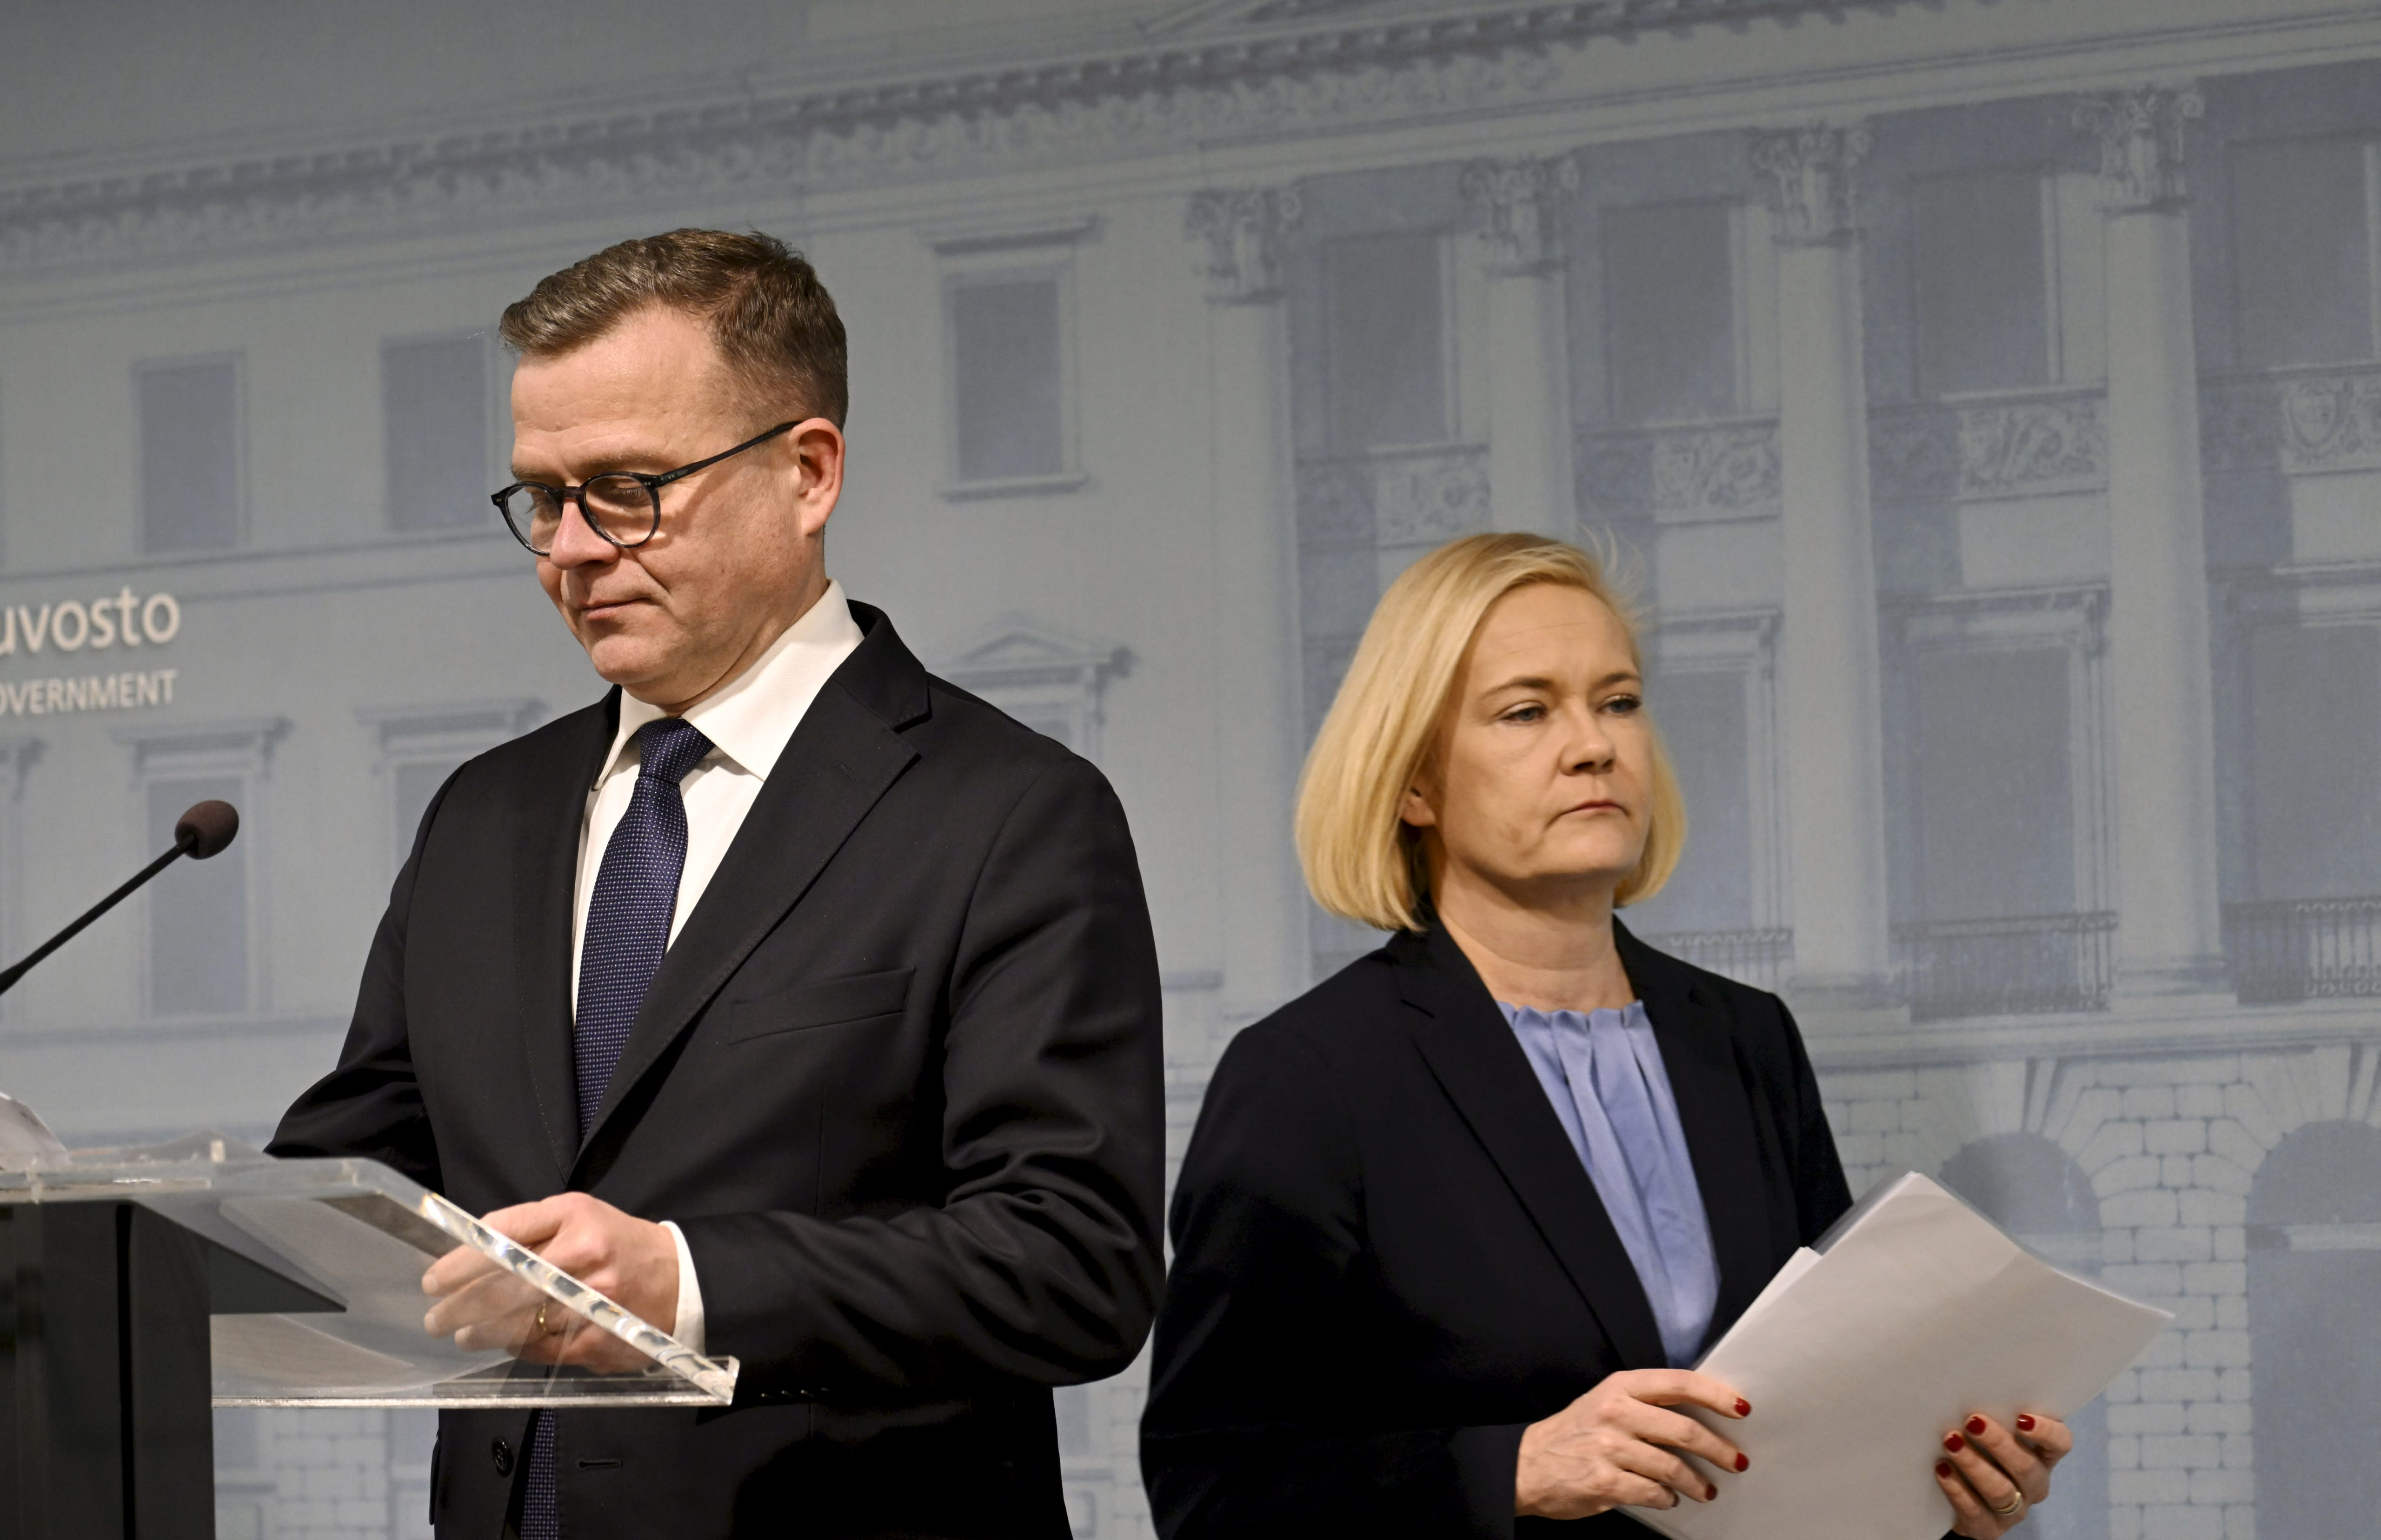 Orpo: Stricter restrictions are needed if the border situation escalates